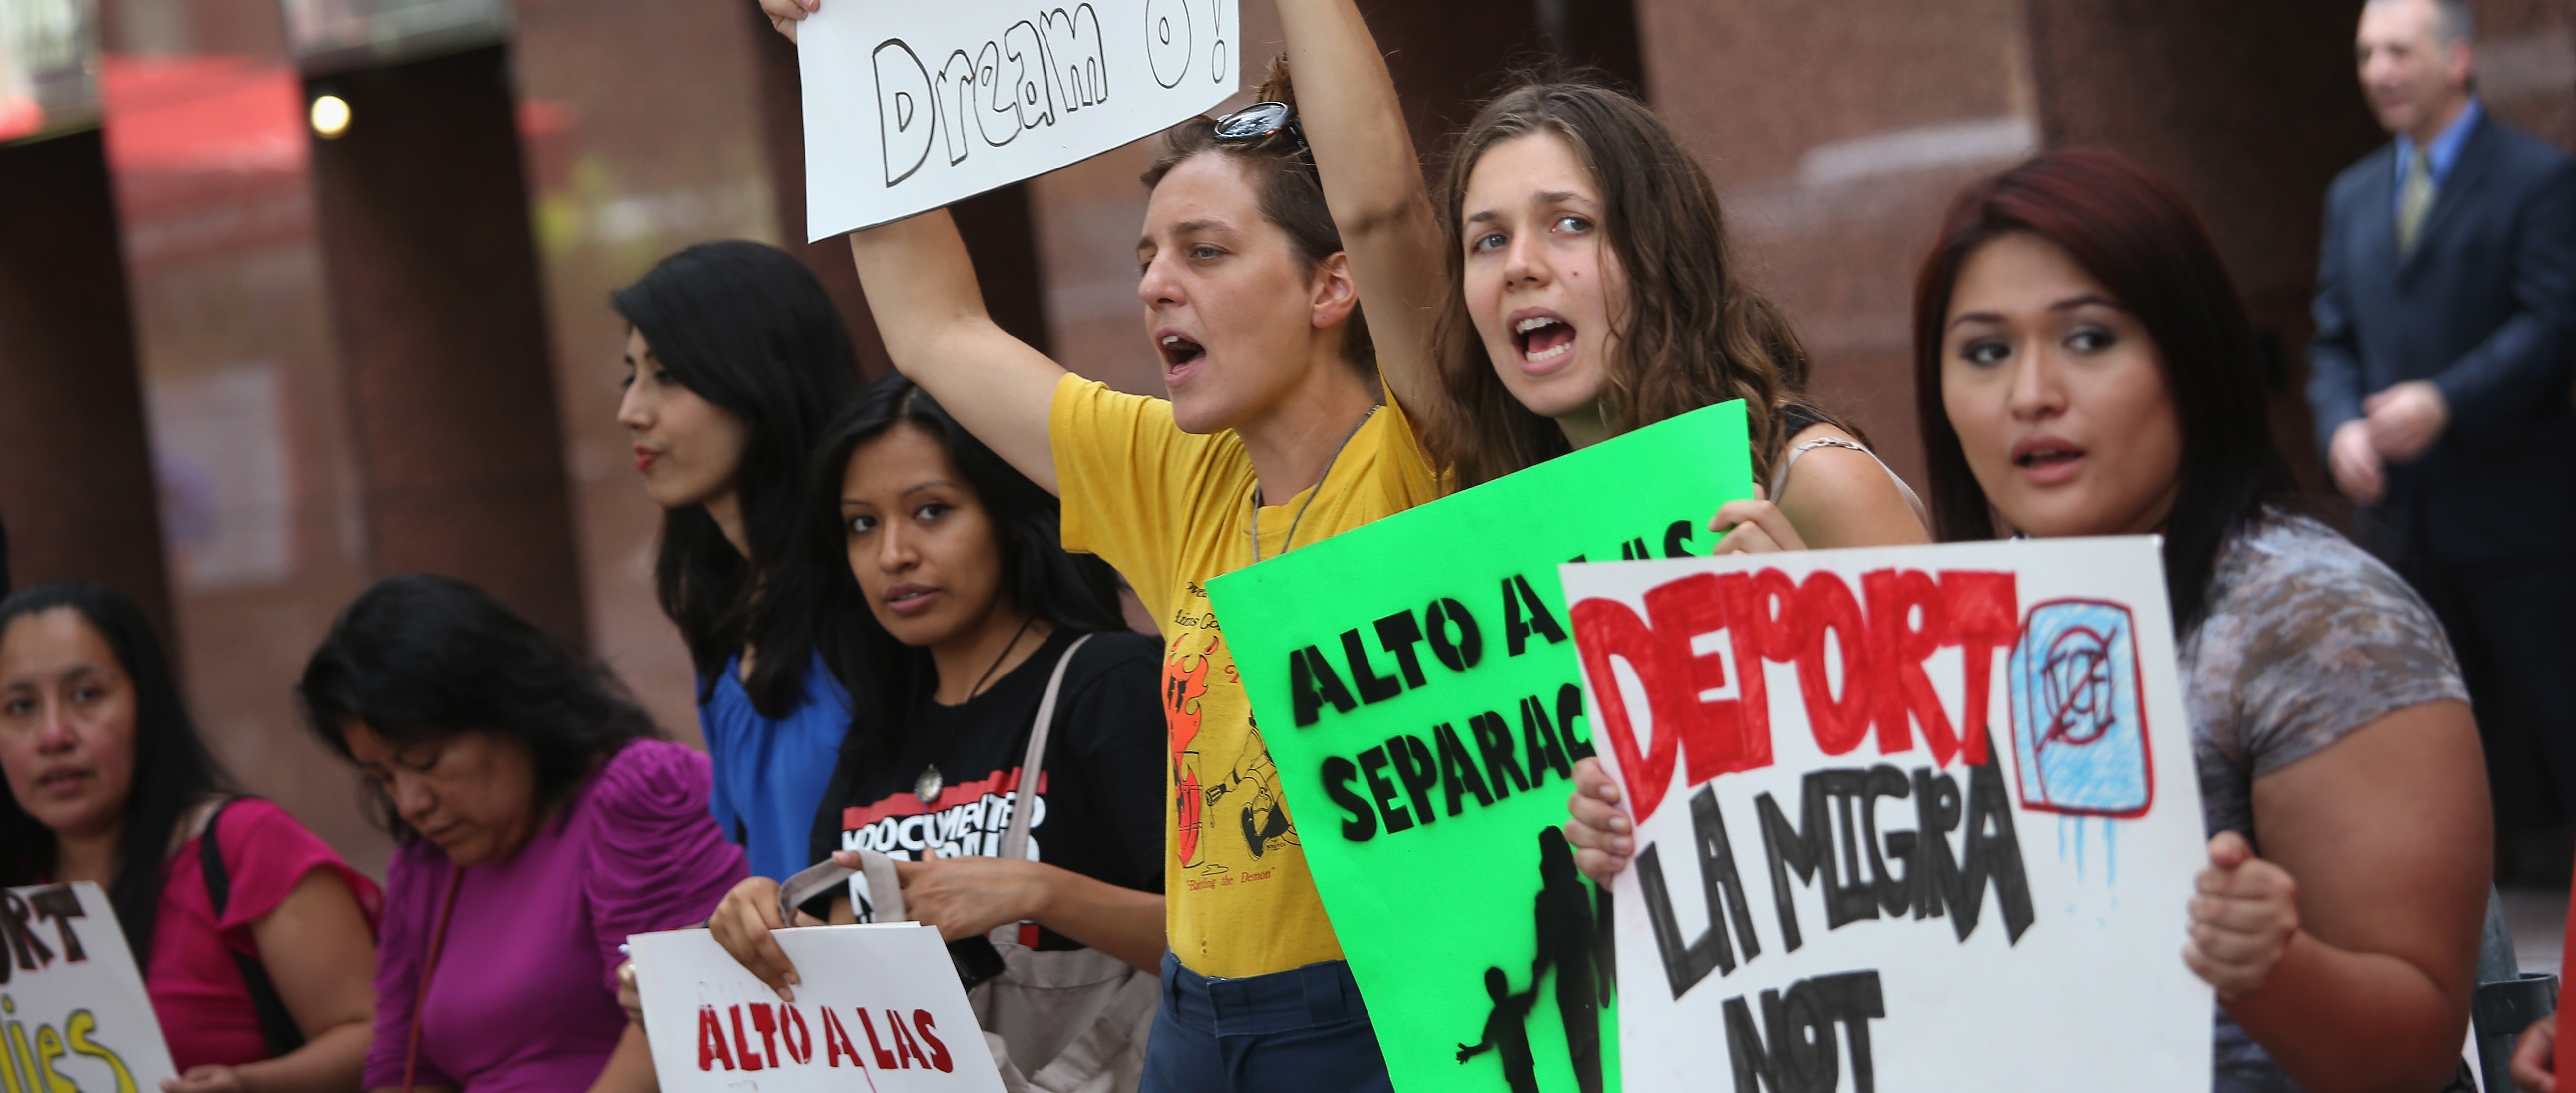 Undocumented Immigrant Activists Elicit Divisions Among Advocates Fox News